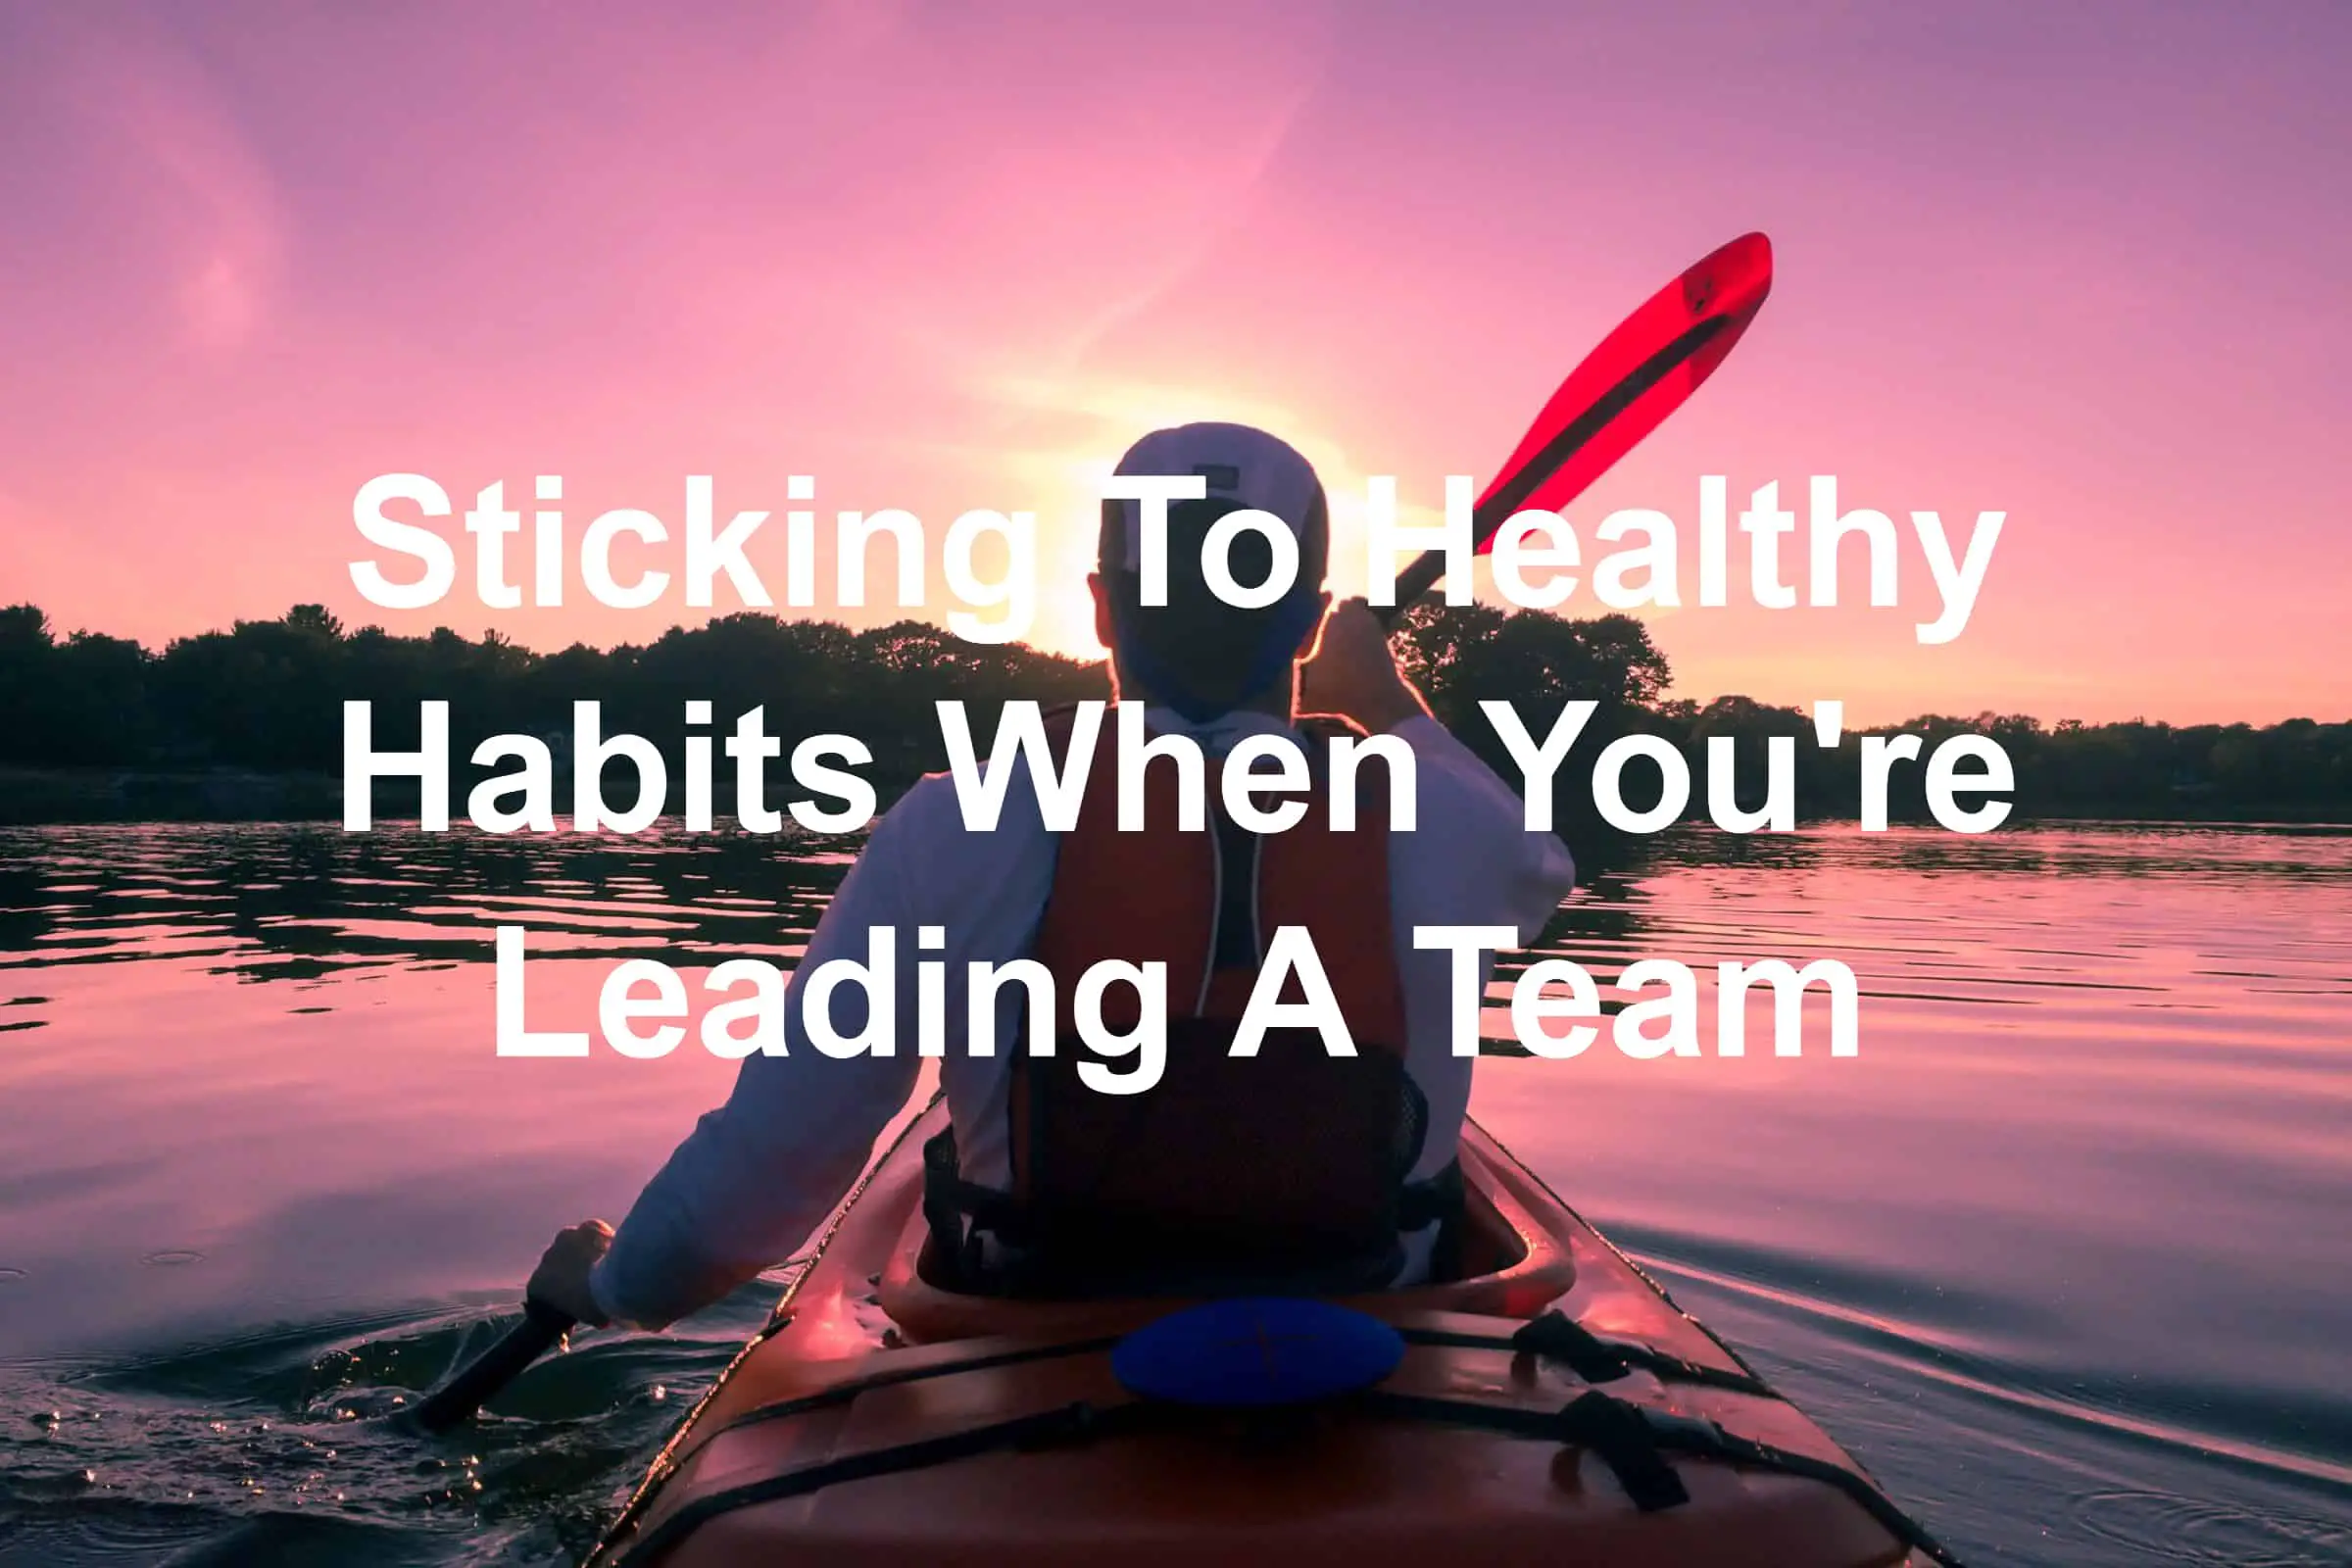 You need to stick to your healthy habits via activities you enjoy like kayaking